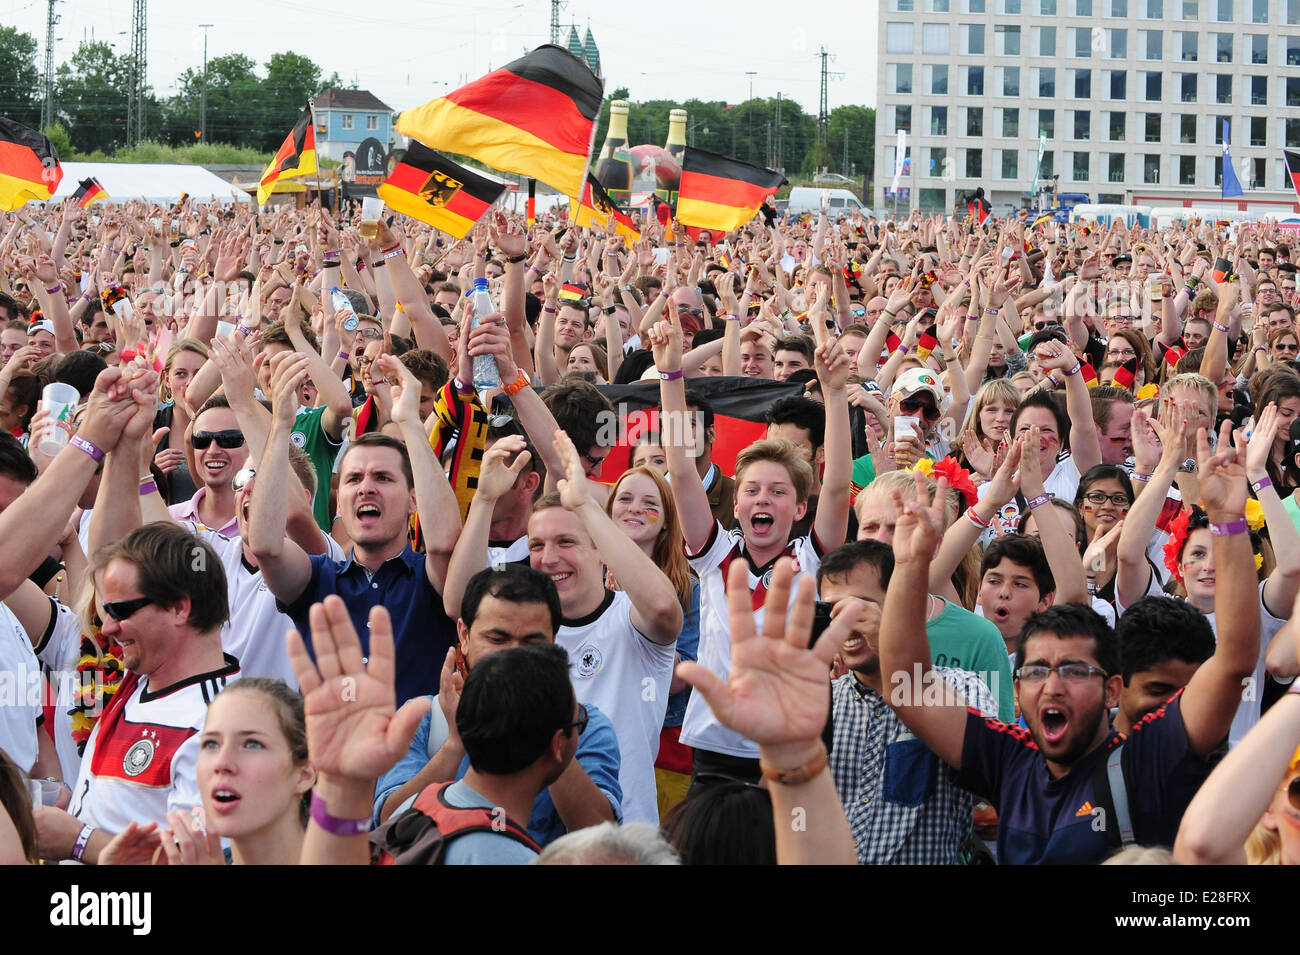 Freiburg, Germany. 16th June, 2014. More than ten thousand fans watch the game from the FIFA World Cup 2014 in Brazil between Germany and Portugal at a public viewing area in Freiburg. Germany wins with a devastating 4:0. Photo: Miroslav Dakov/ Alamy Live News Stock Photo